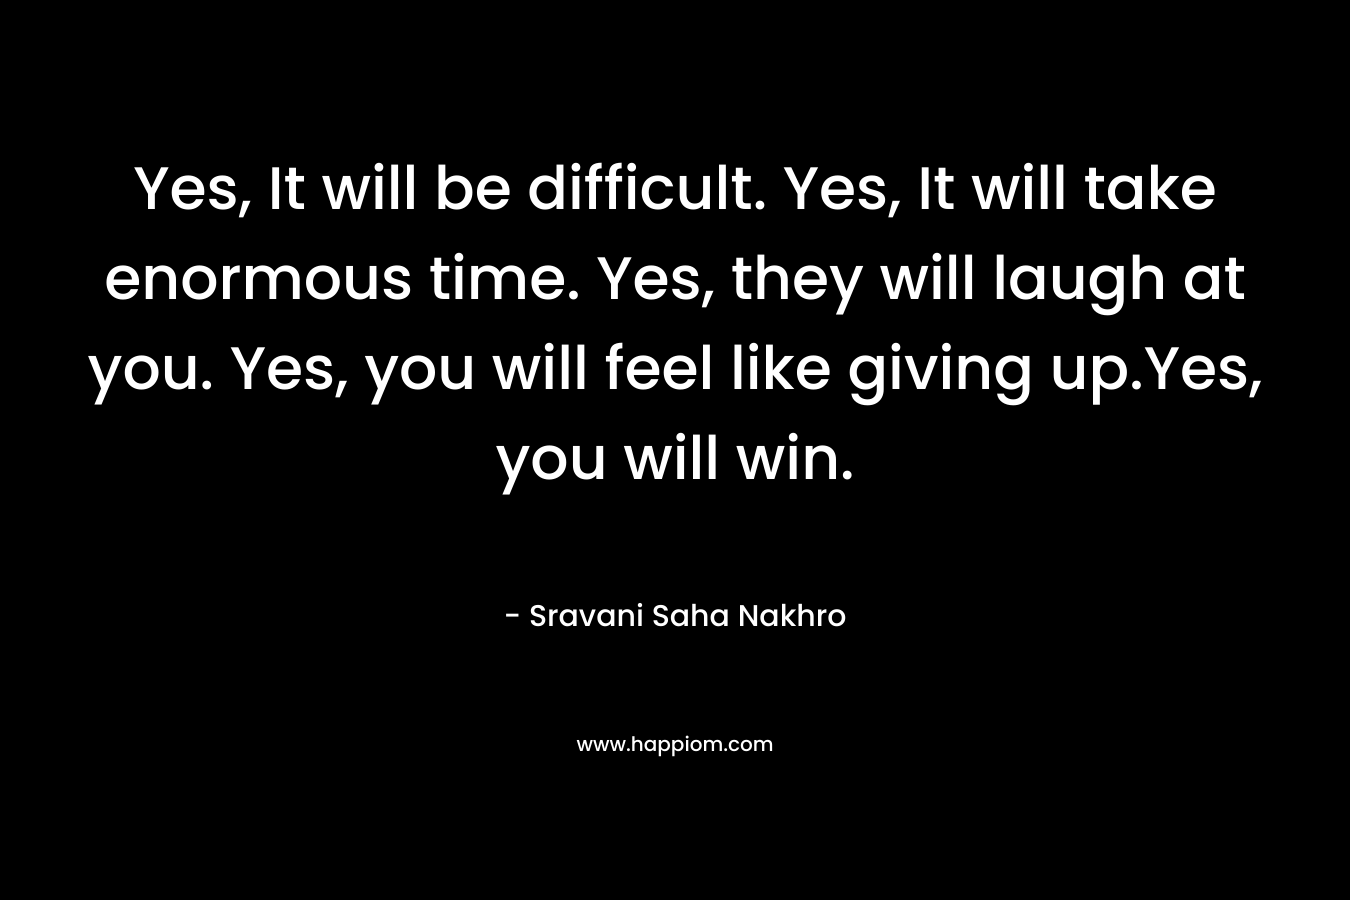 Yes, It will be difficult. Yes, It will take enormous time. Yes, they will laugh at you. Yes, you will feel like giving up.Yes, you will win.